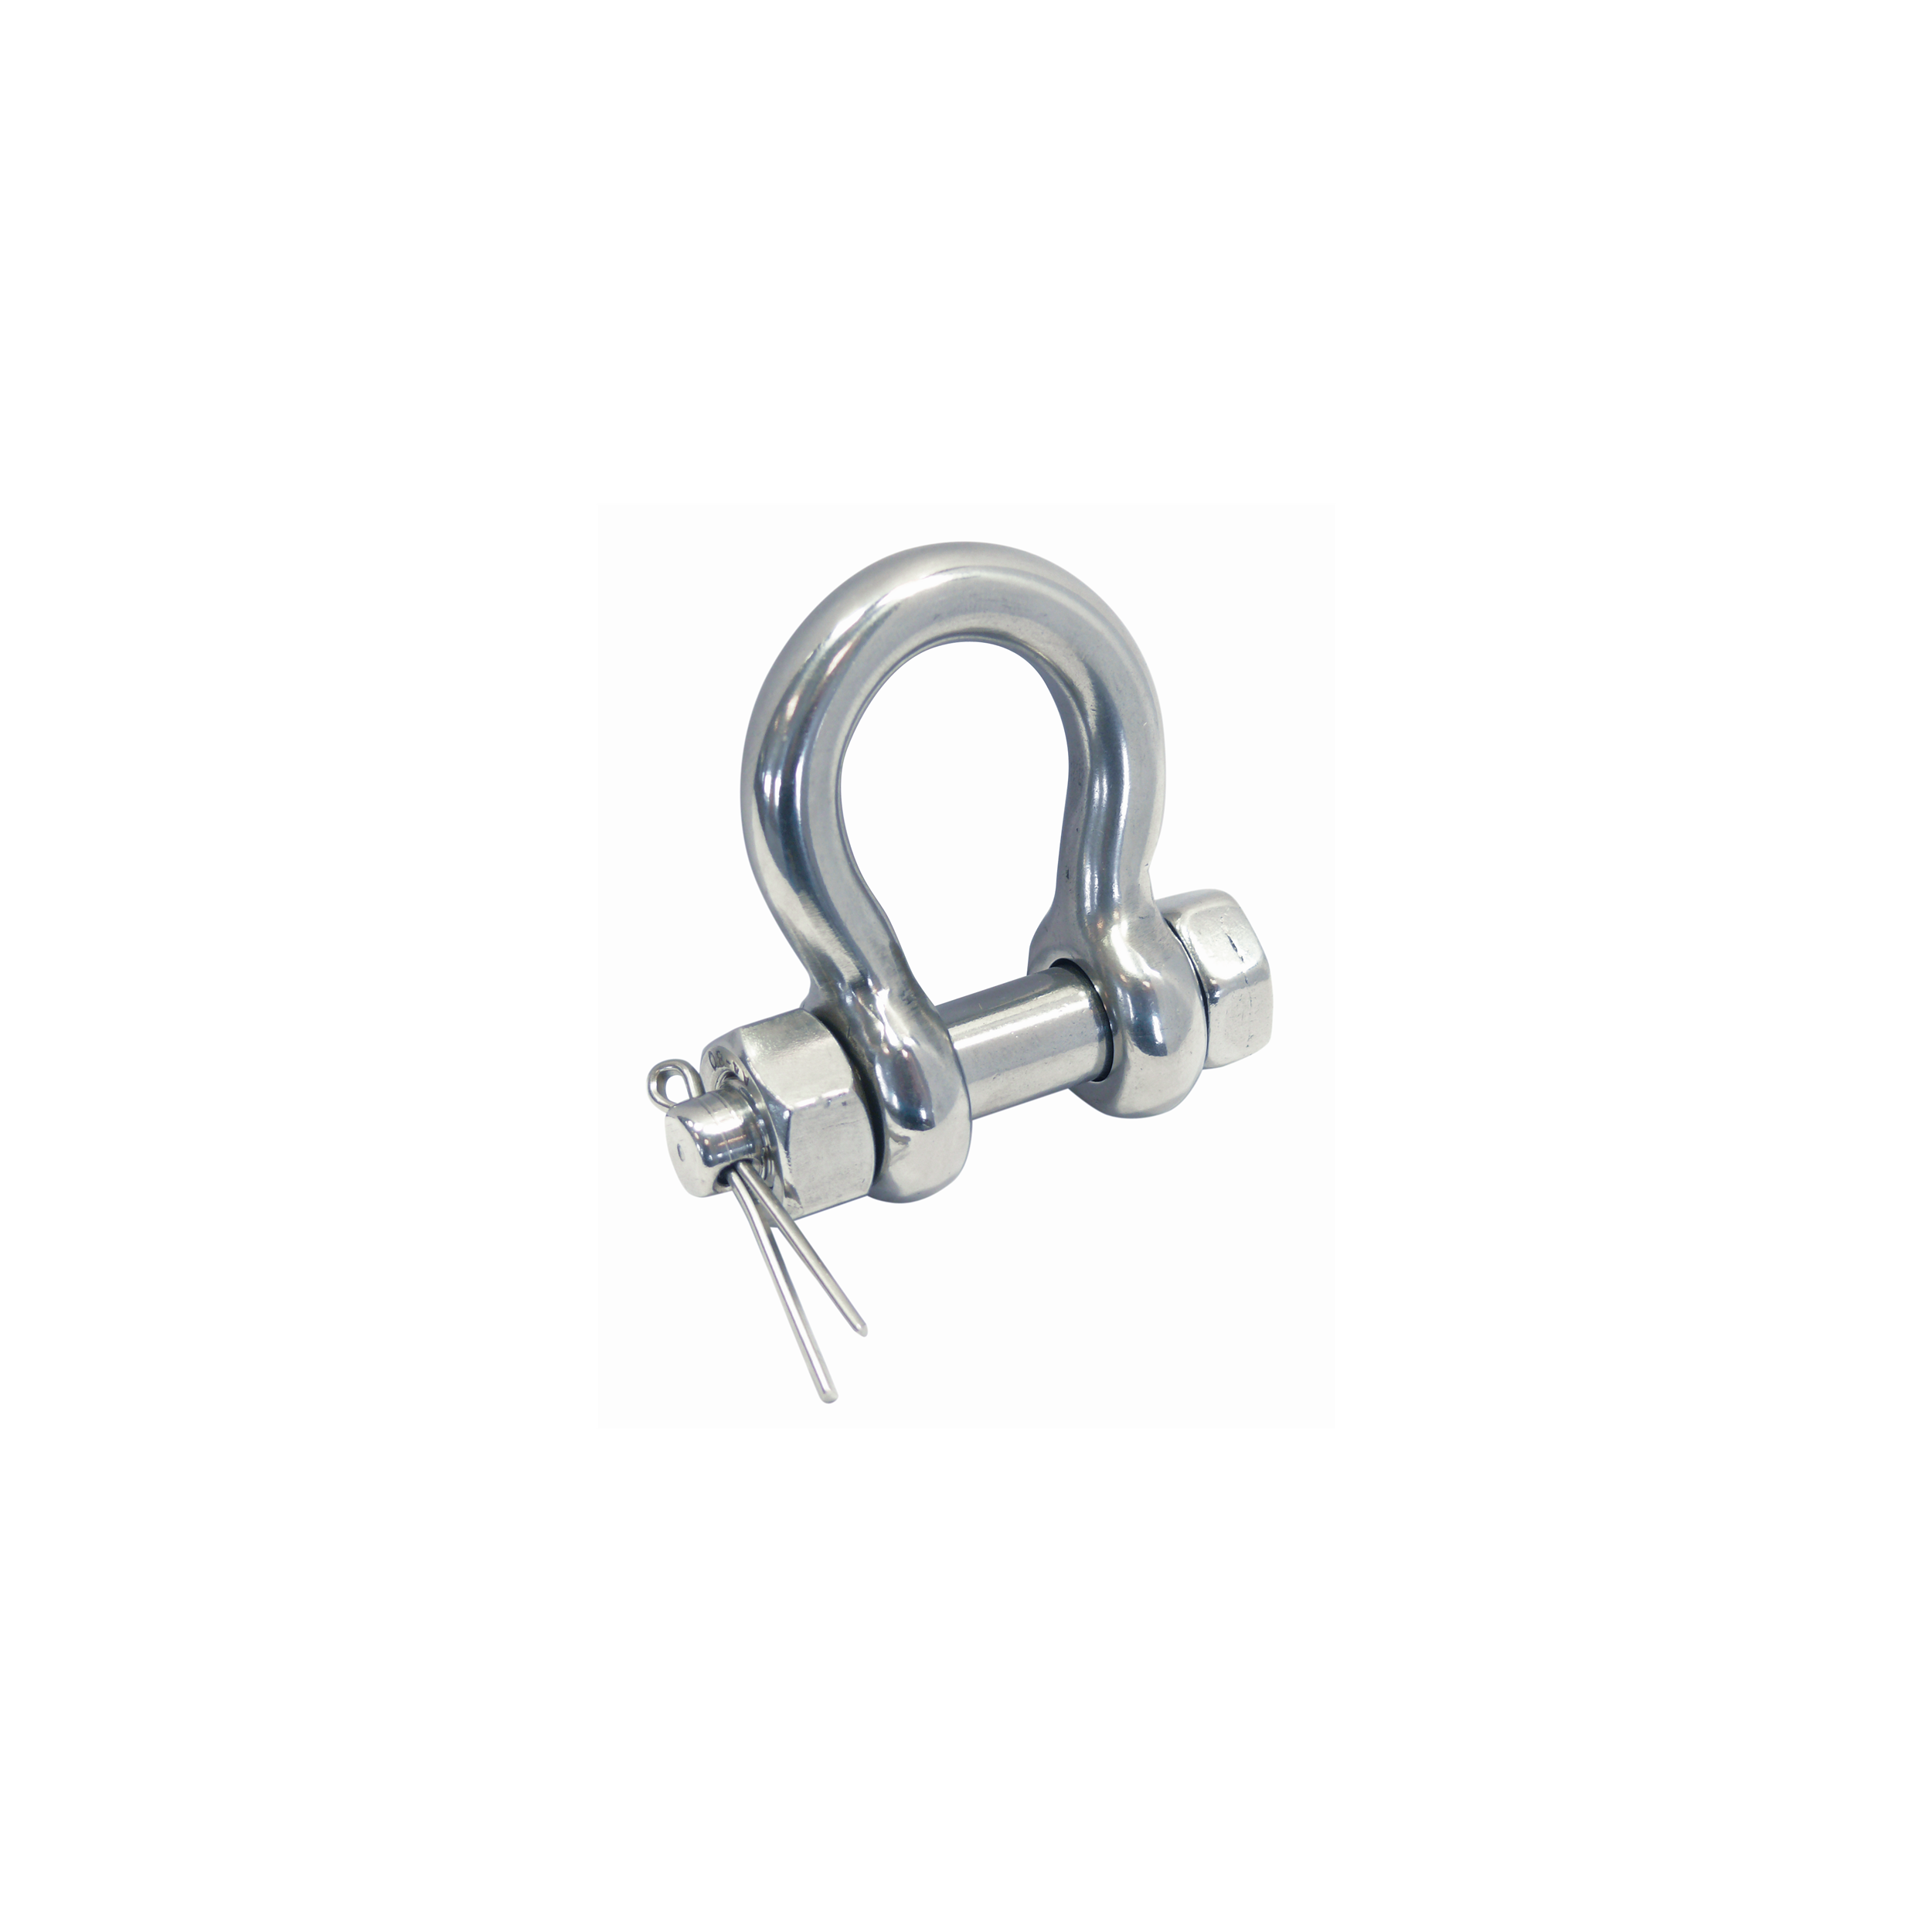 Bow shackle with secure bolt A4  bolt 22mm, bow 20mm